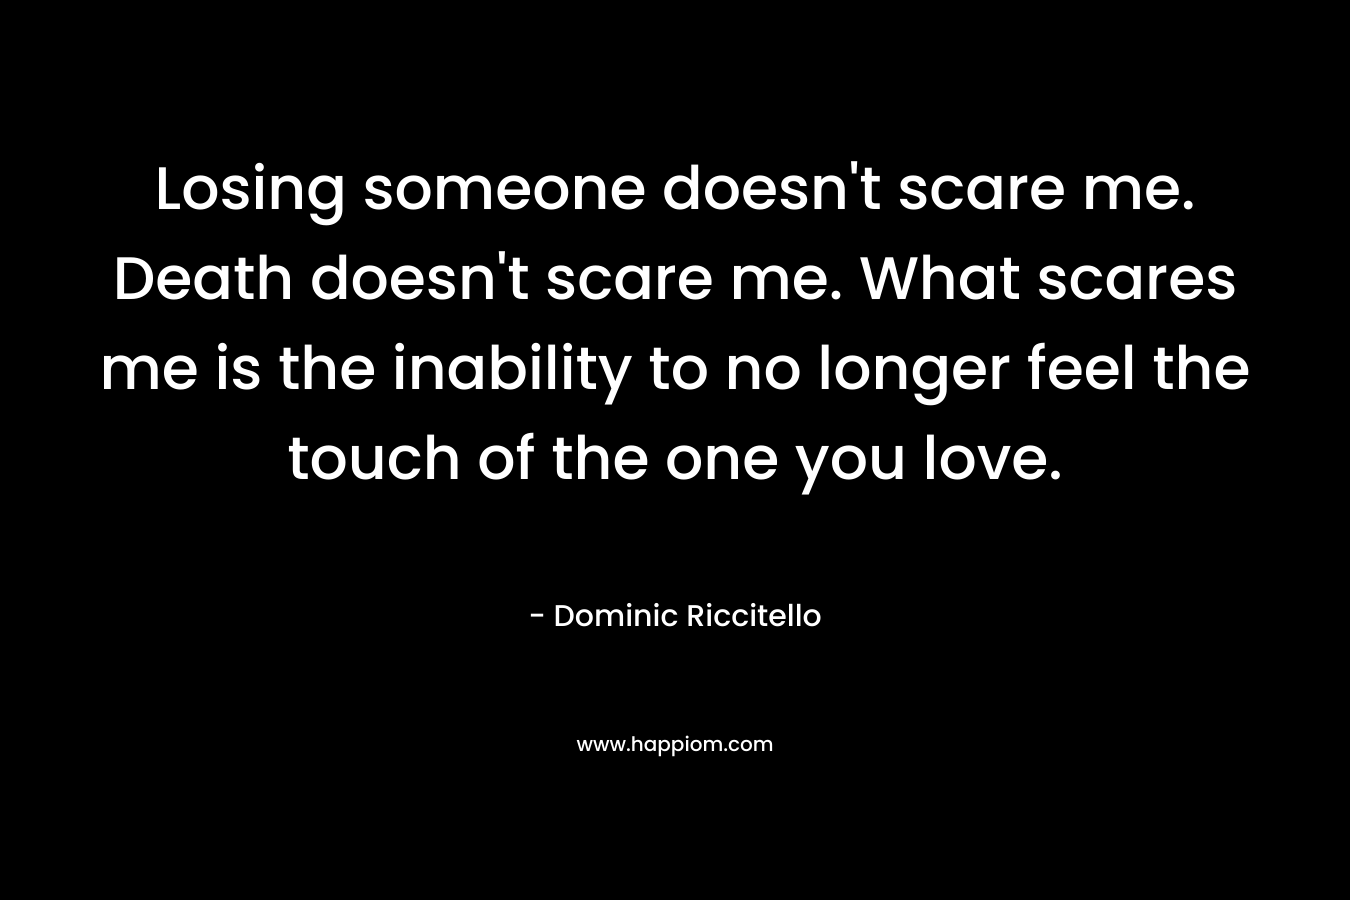 Losing someone doesn't scare me. Death doesn't scare me. What scares me is the inability to no longer feel the touch of the one you love.